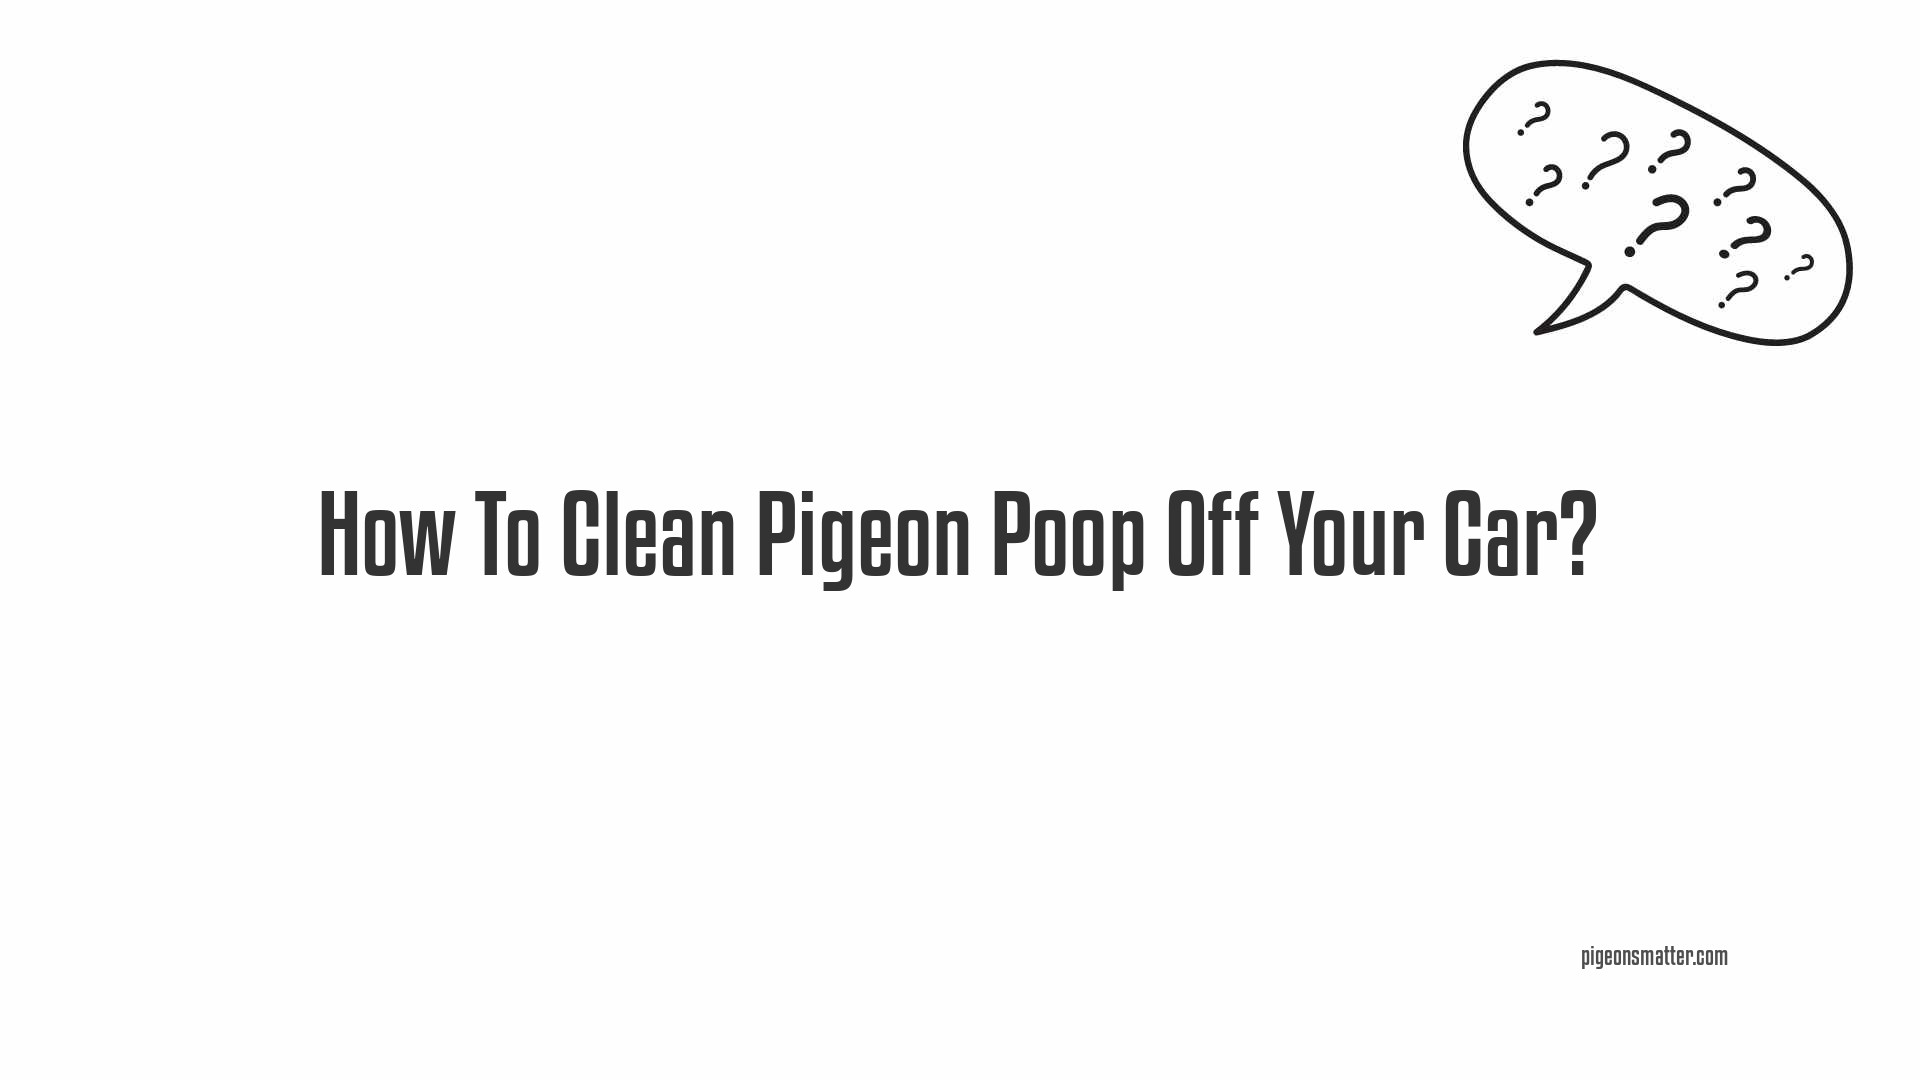 How To Clean Pigeon Poop Off Your Car?